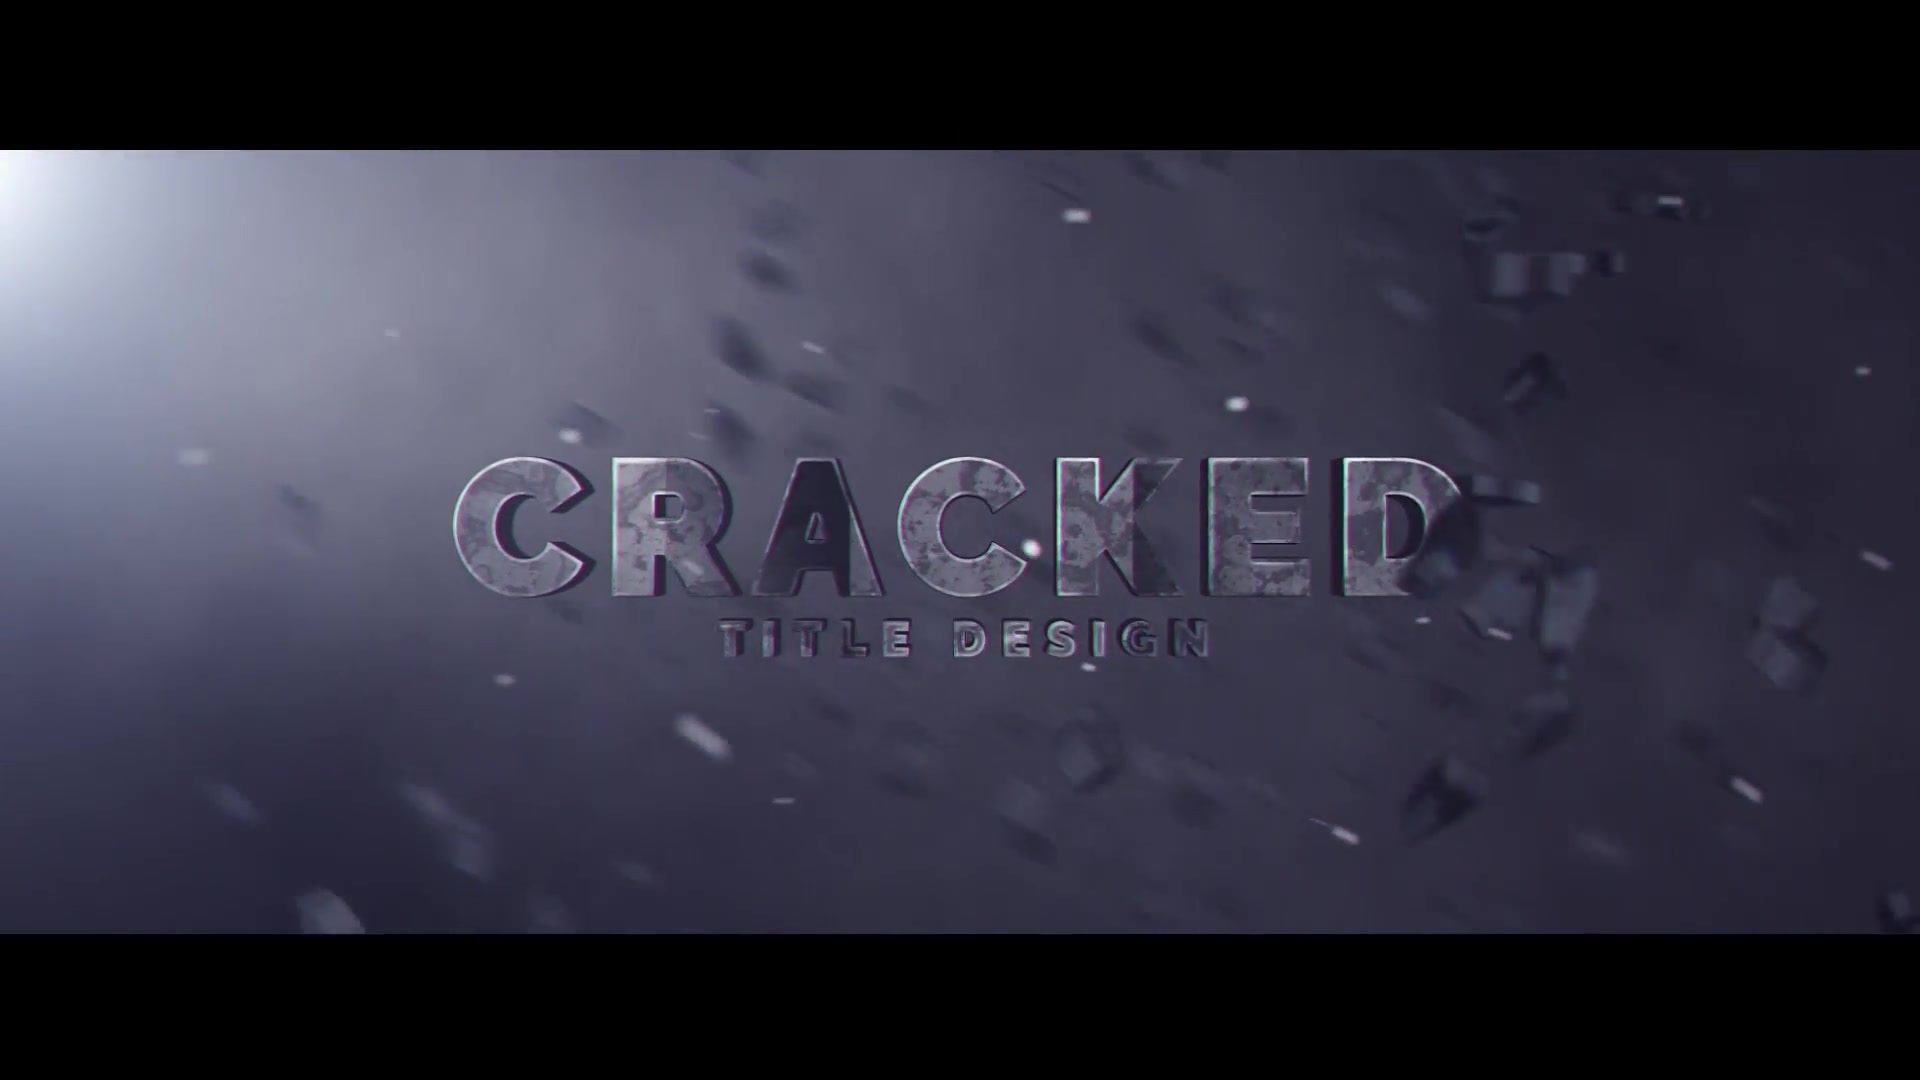 Cracked Title Design - Download Videohive 23215391